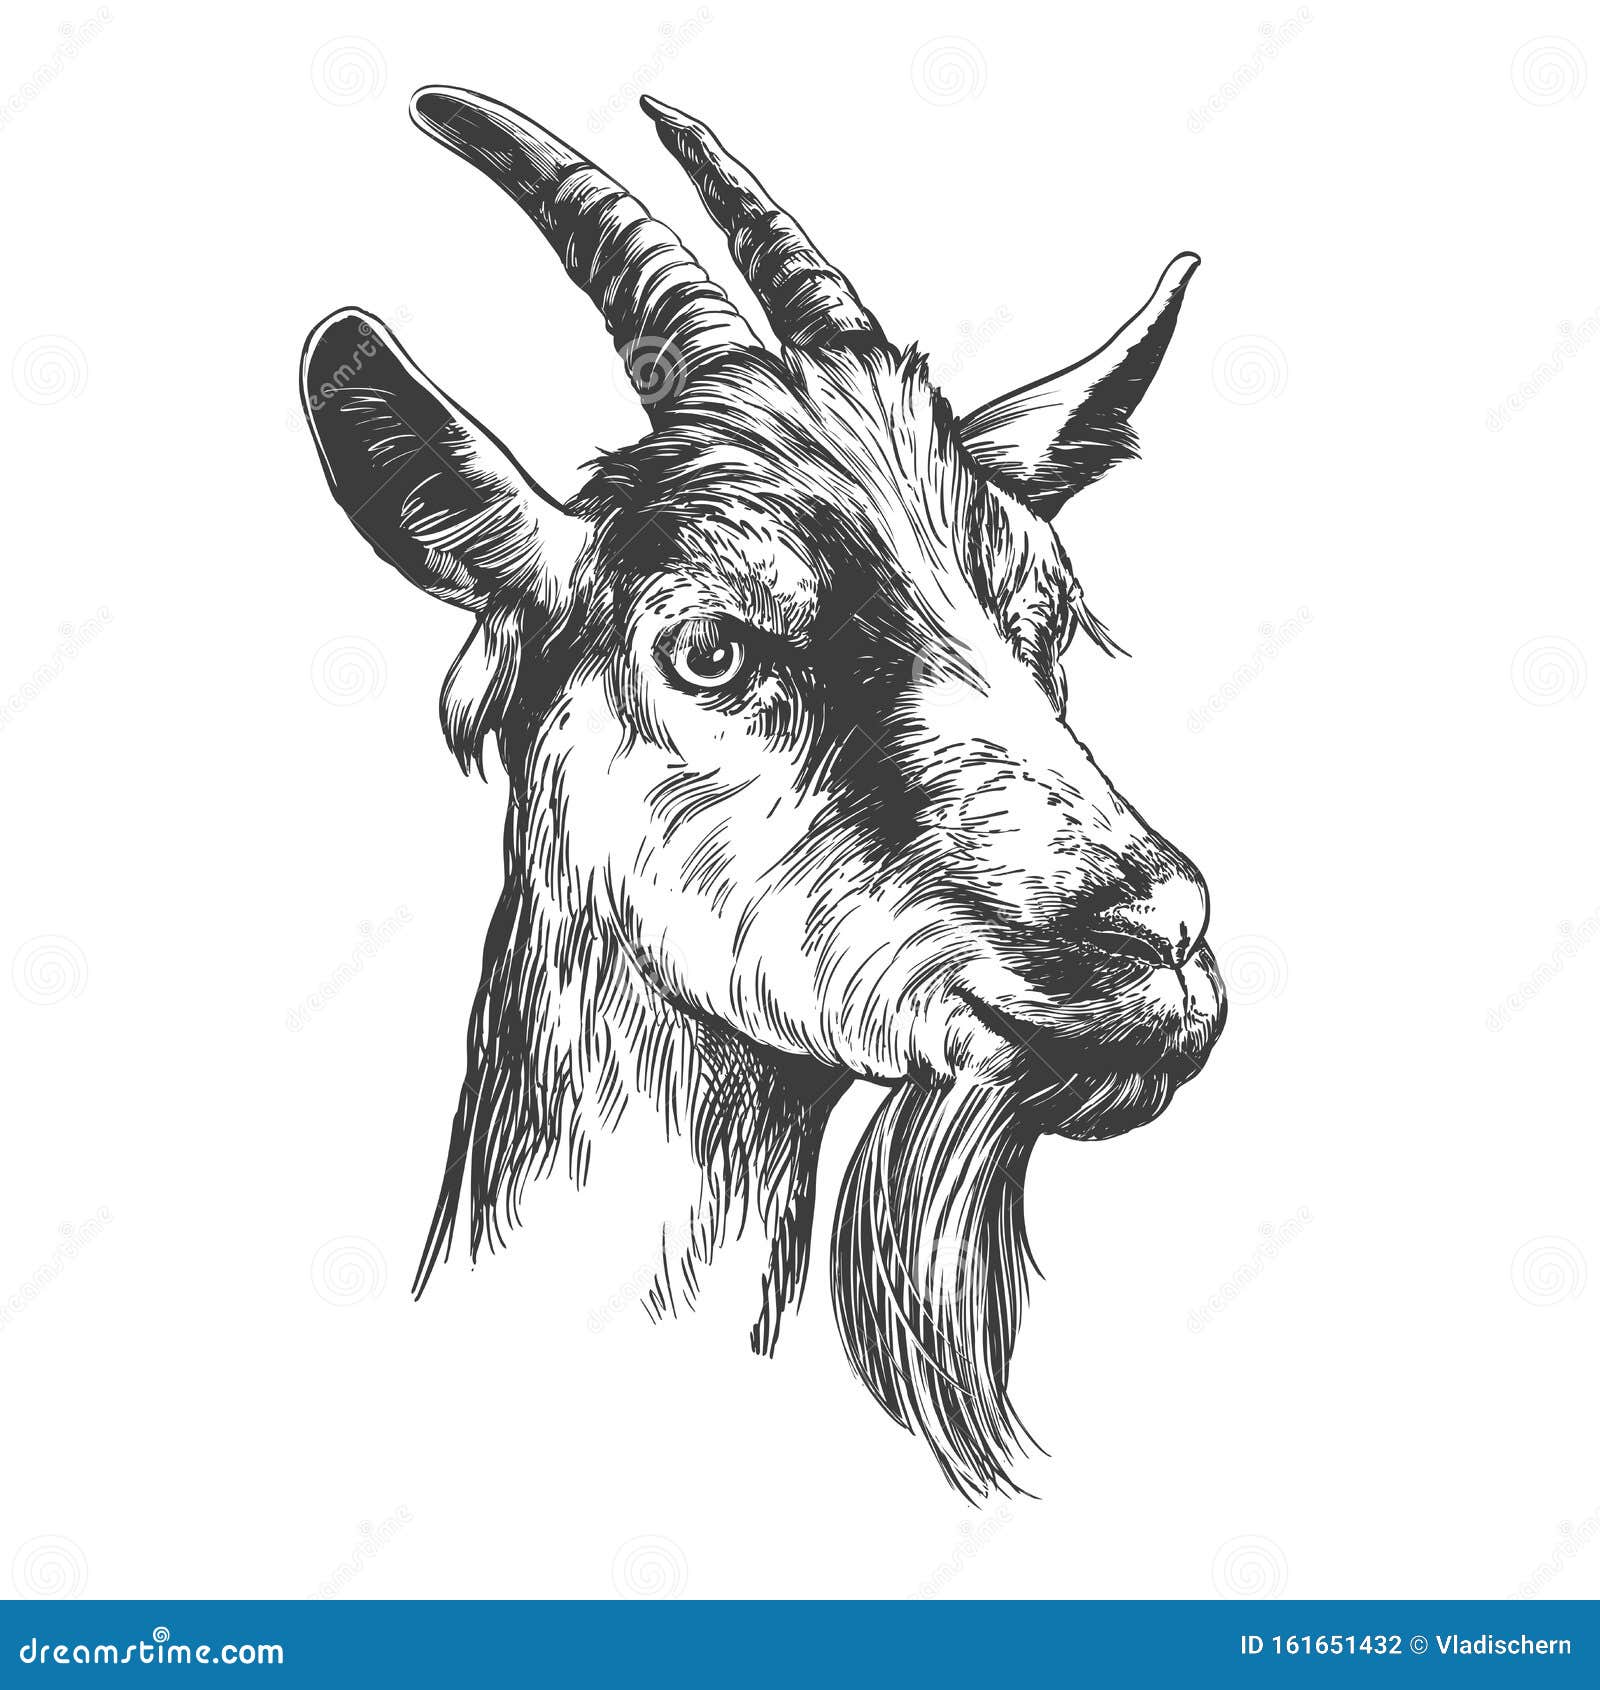 How to Draw a Goat Step by Step Easy for BeginnersKids  Simple Goats  Drawing Tutorial  YouTube